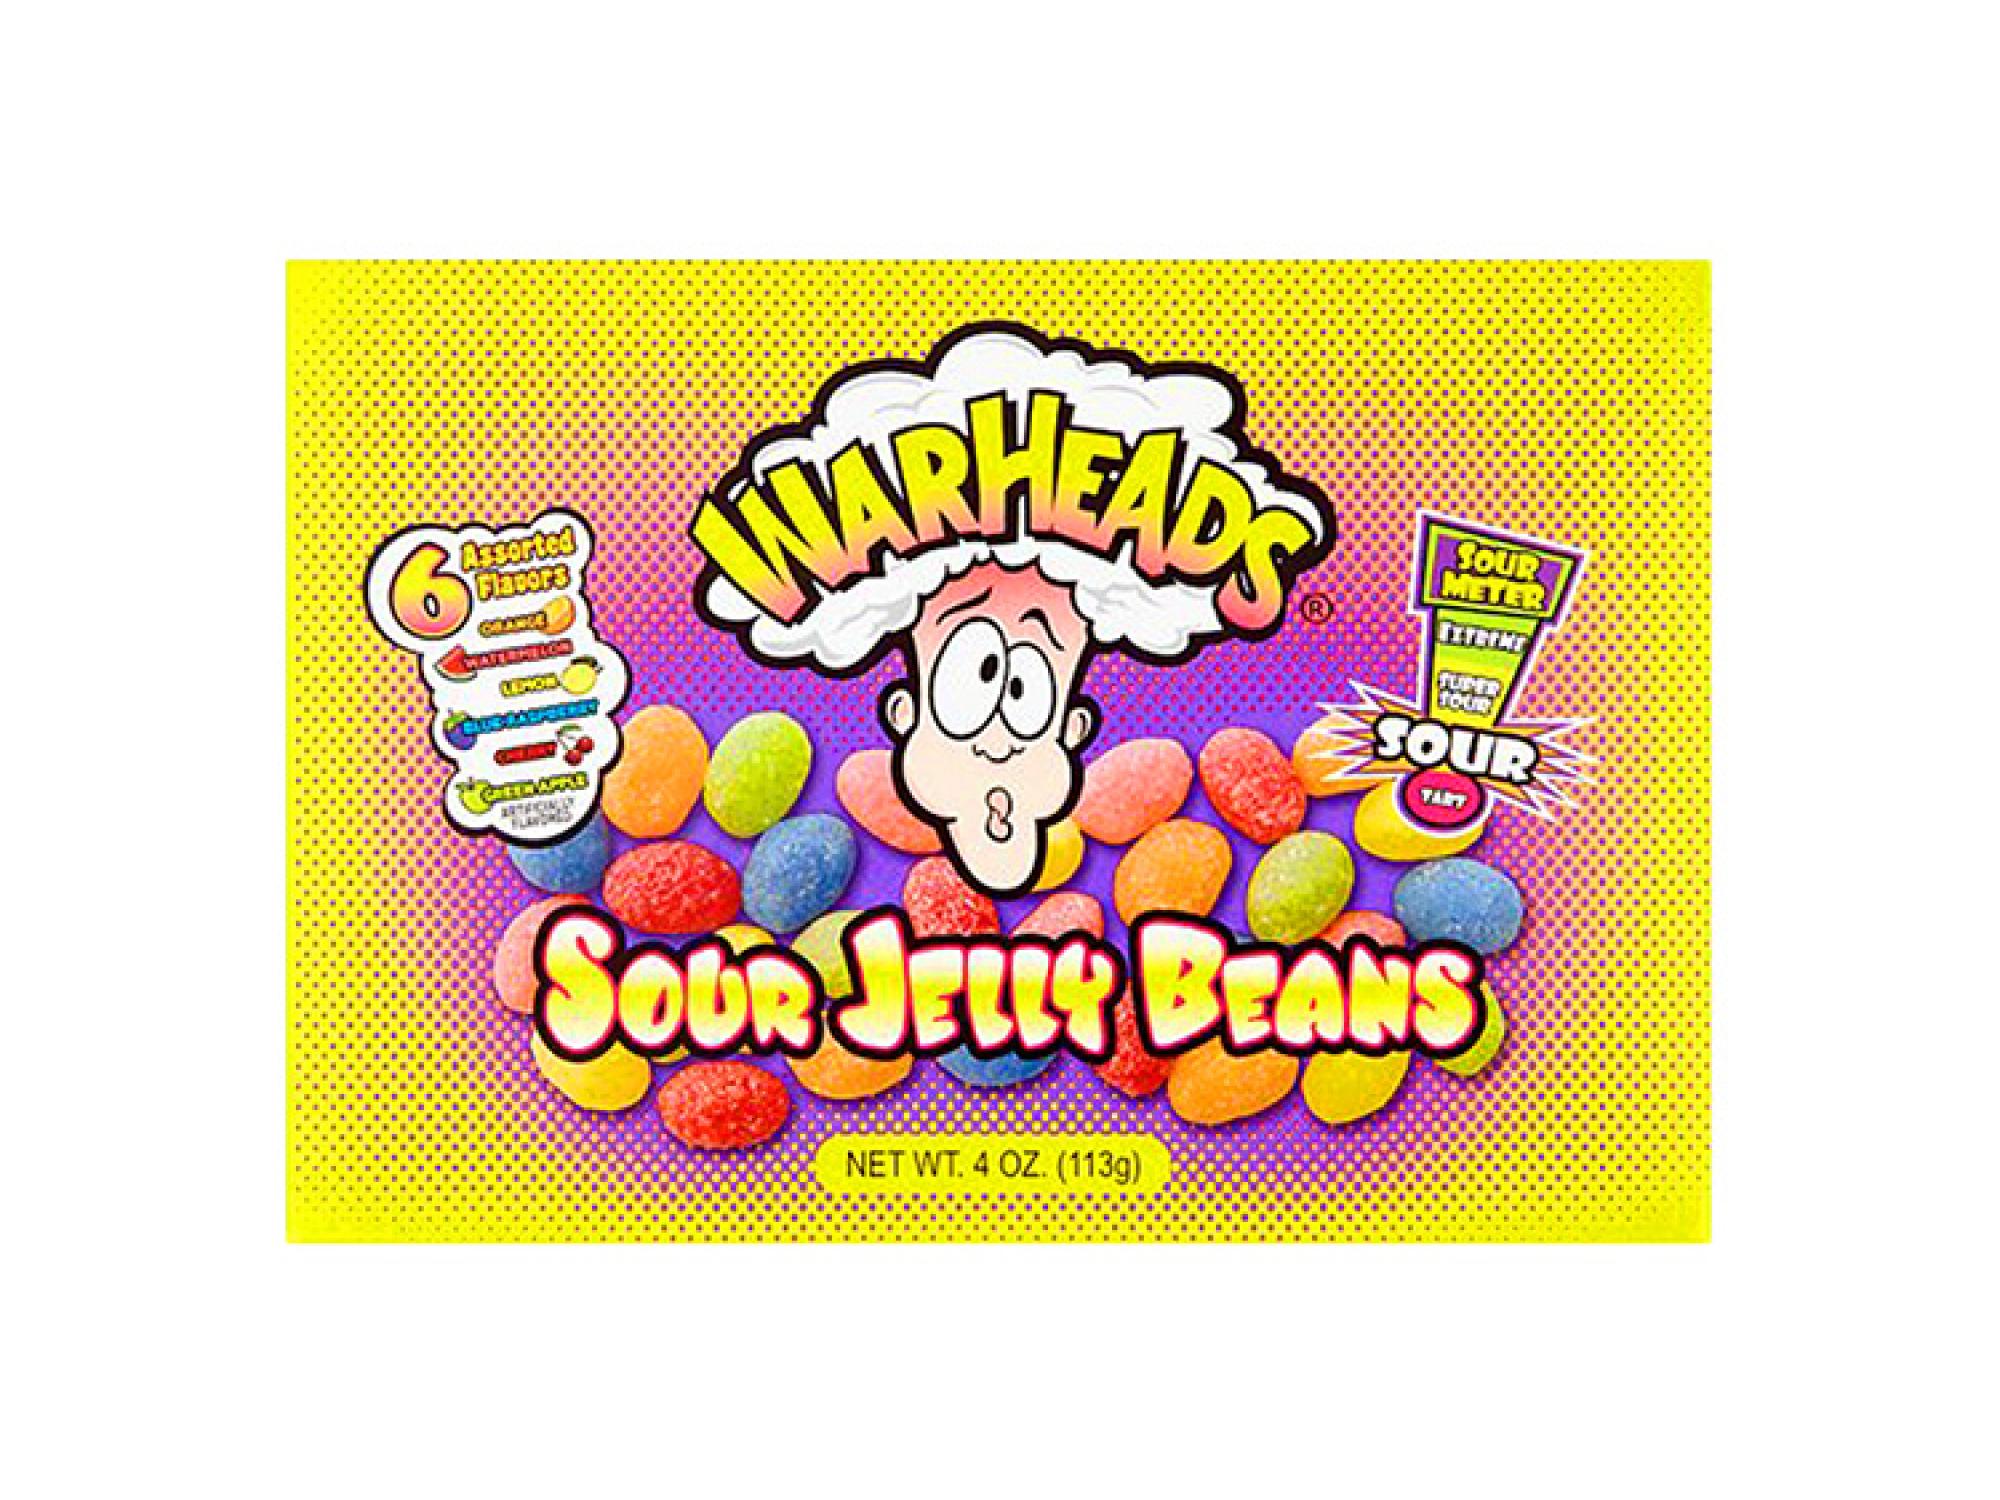 Warheads Sour-Jelly Beans